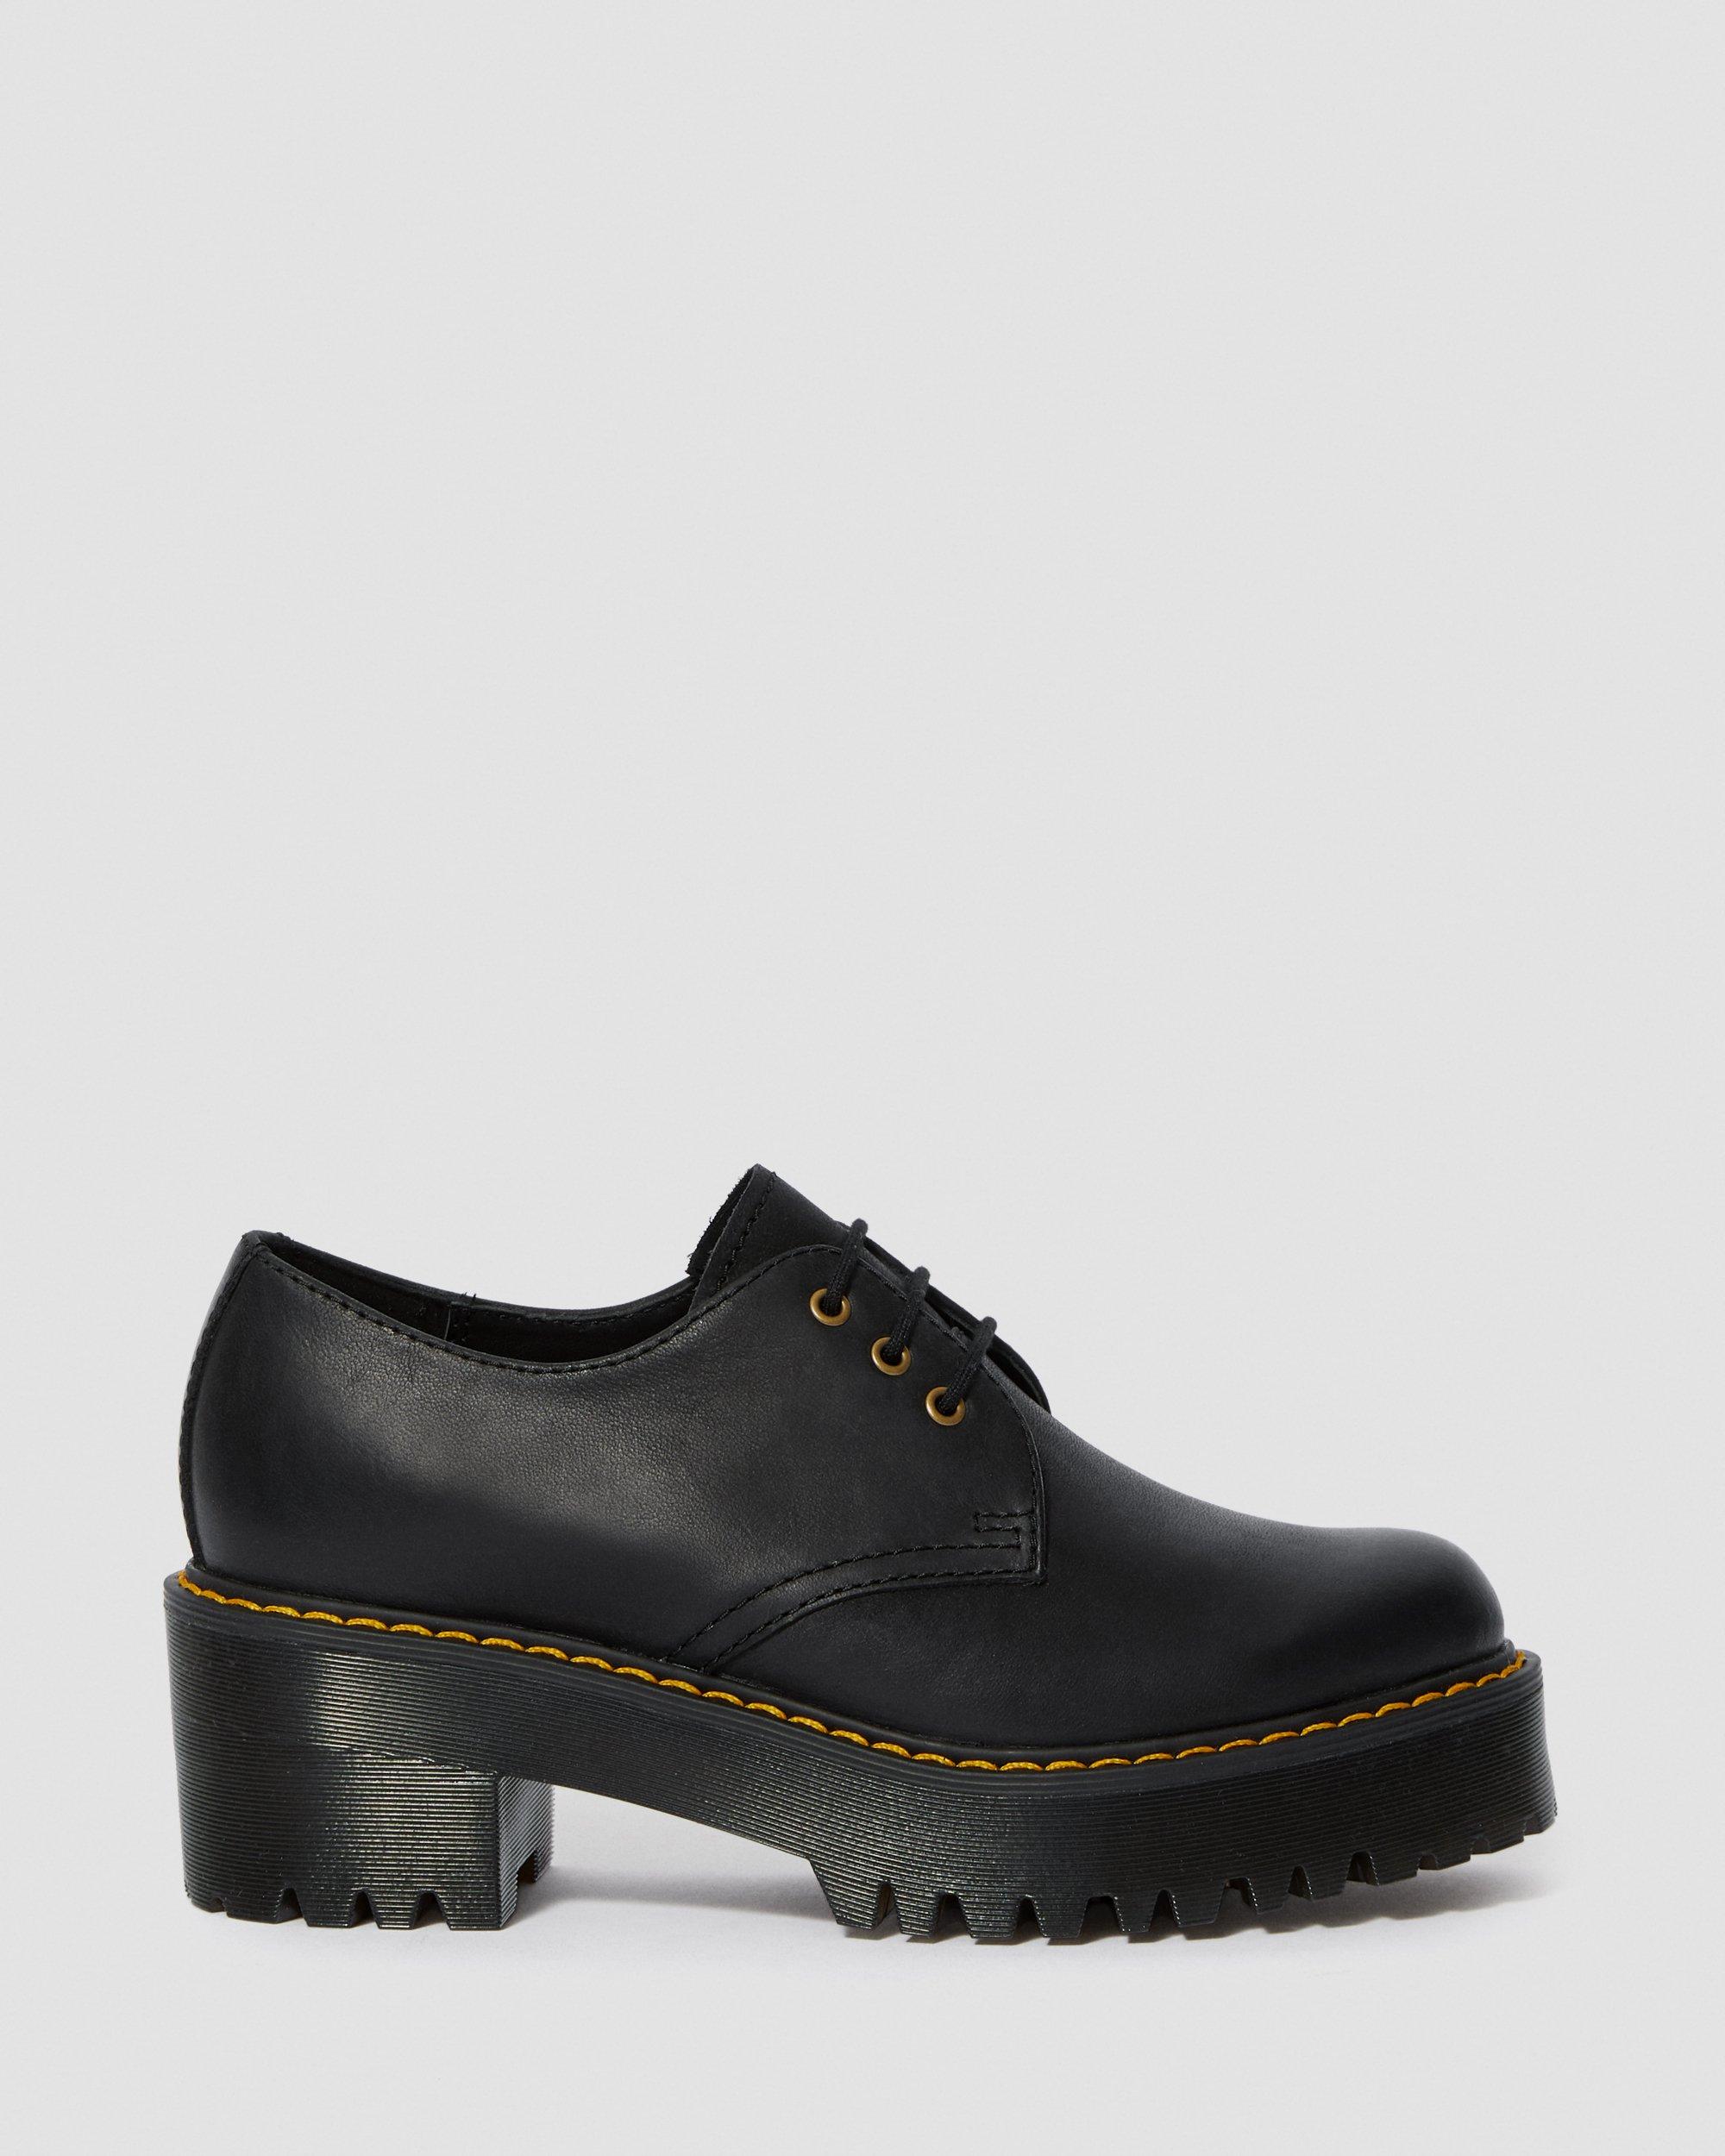 SHRIVER LOW LEATHER LACE UP HEELED SHOES in Noir